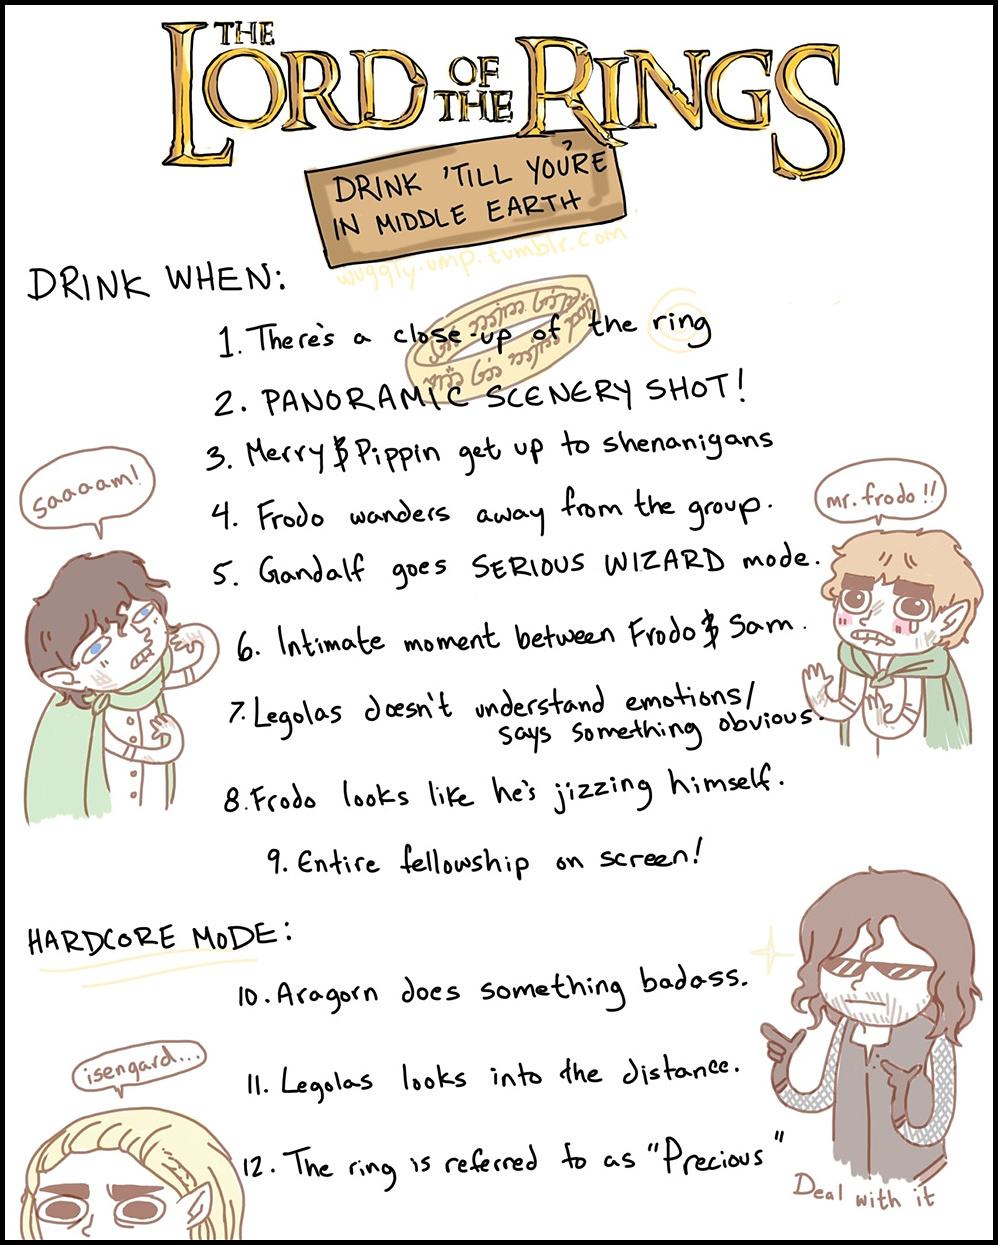 Obrázek -The Lord of the Rings drinking game-      17.11.2012